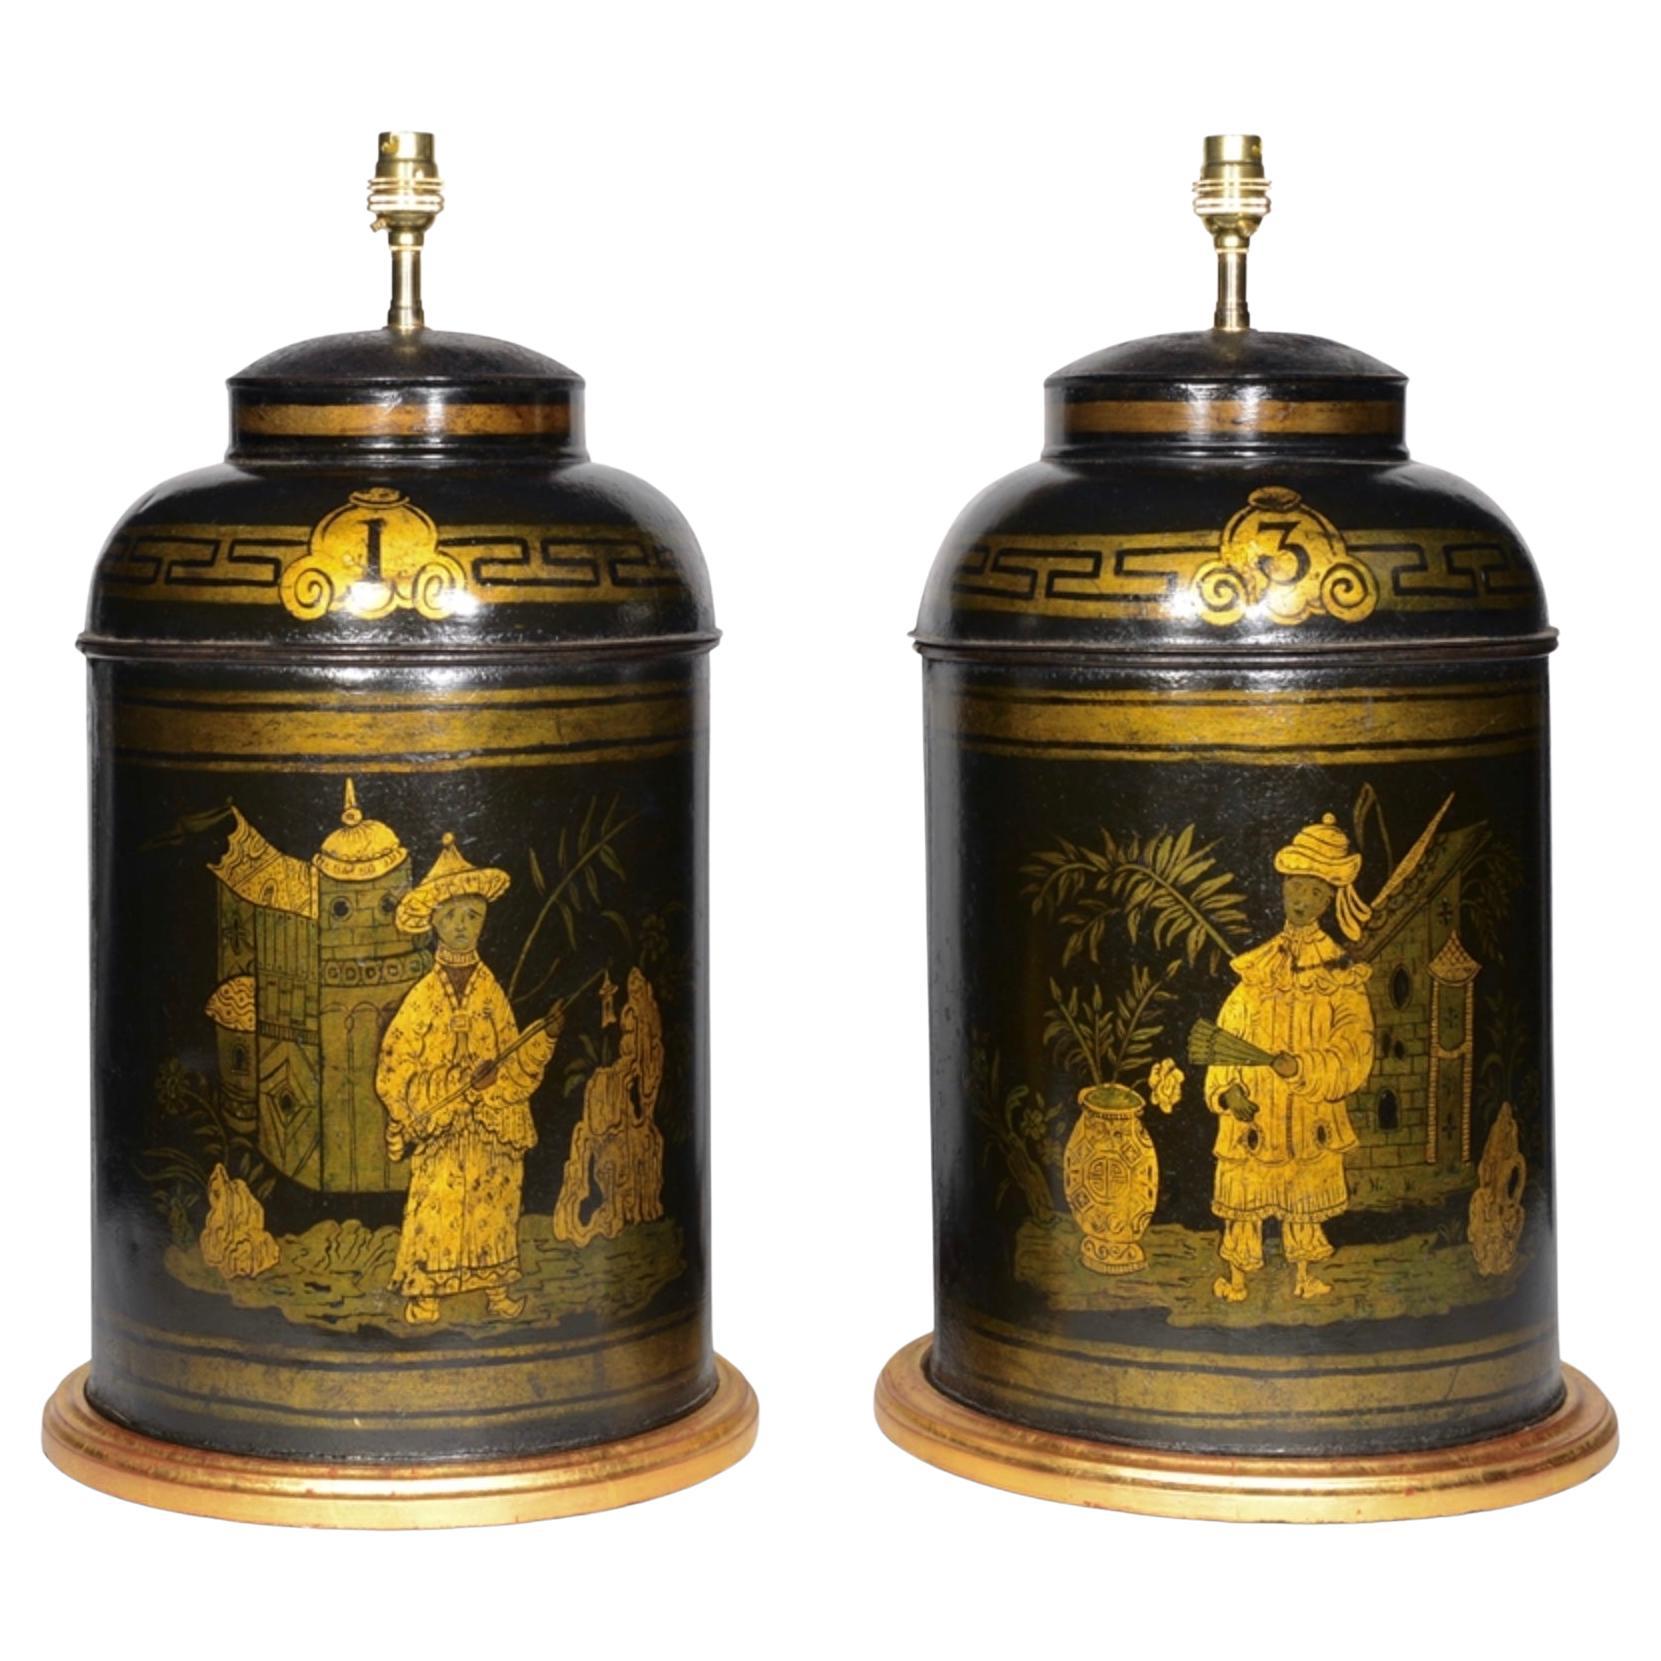 Pair of Gold and Black 19th Century Tea Canister Antique Table Lamps